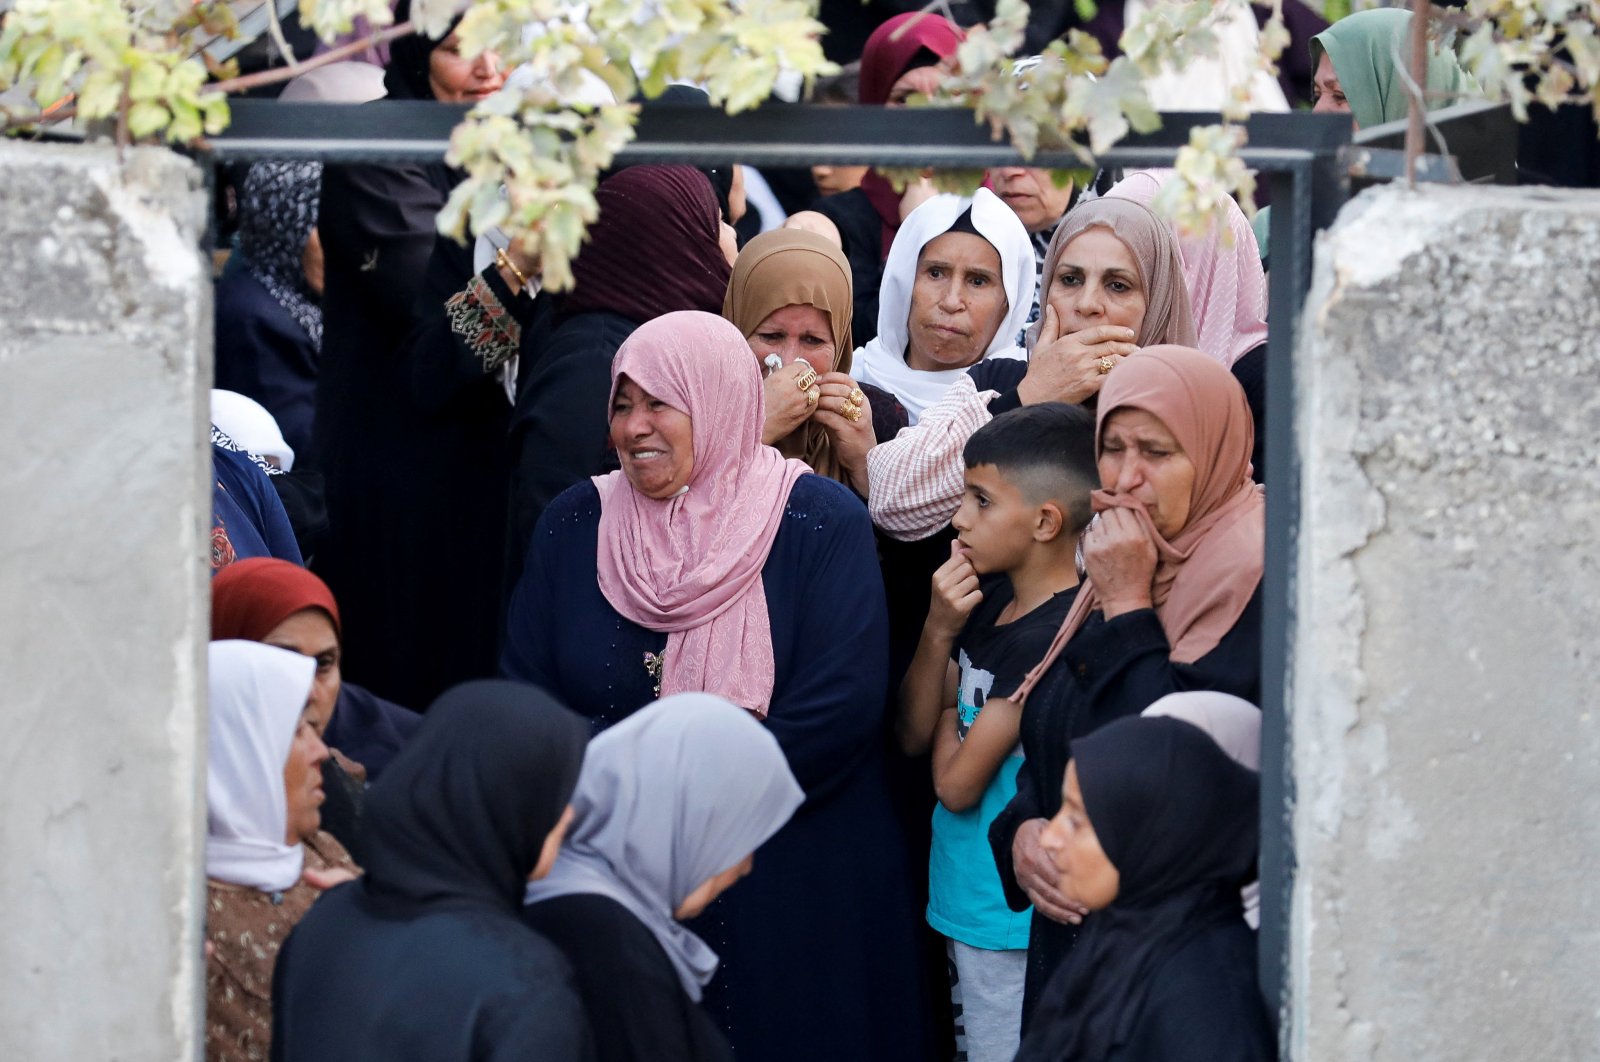 Mourners attend the funeral of Mahmoud Samoudi, 12, who died of a wound he sustained during an Israeli raid in Jenin, in the Israeli-occupied West Bank, Oct. 10, 2022. (Reuters Photo)